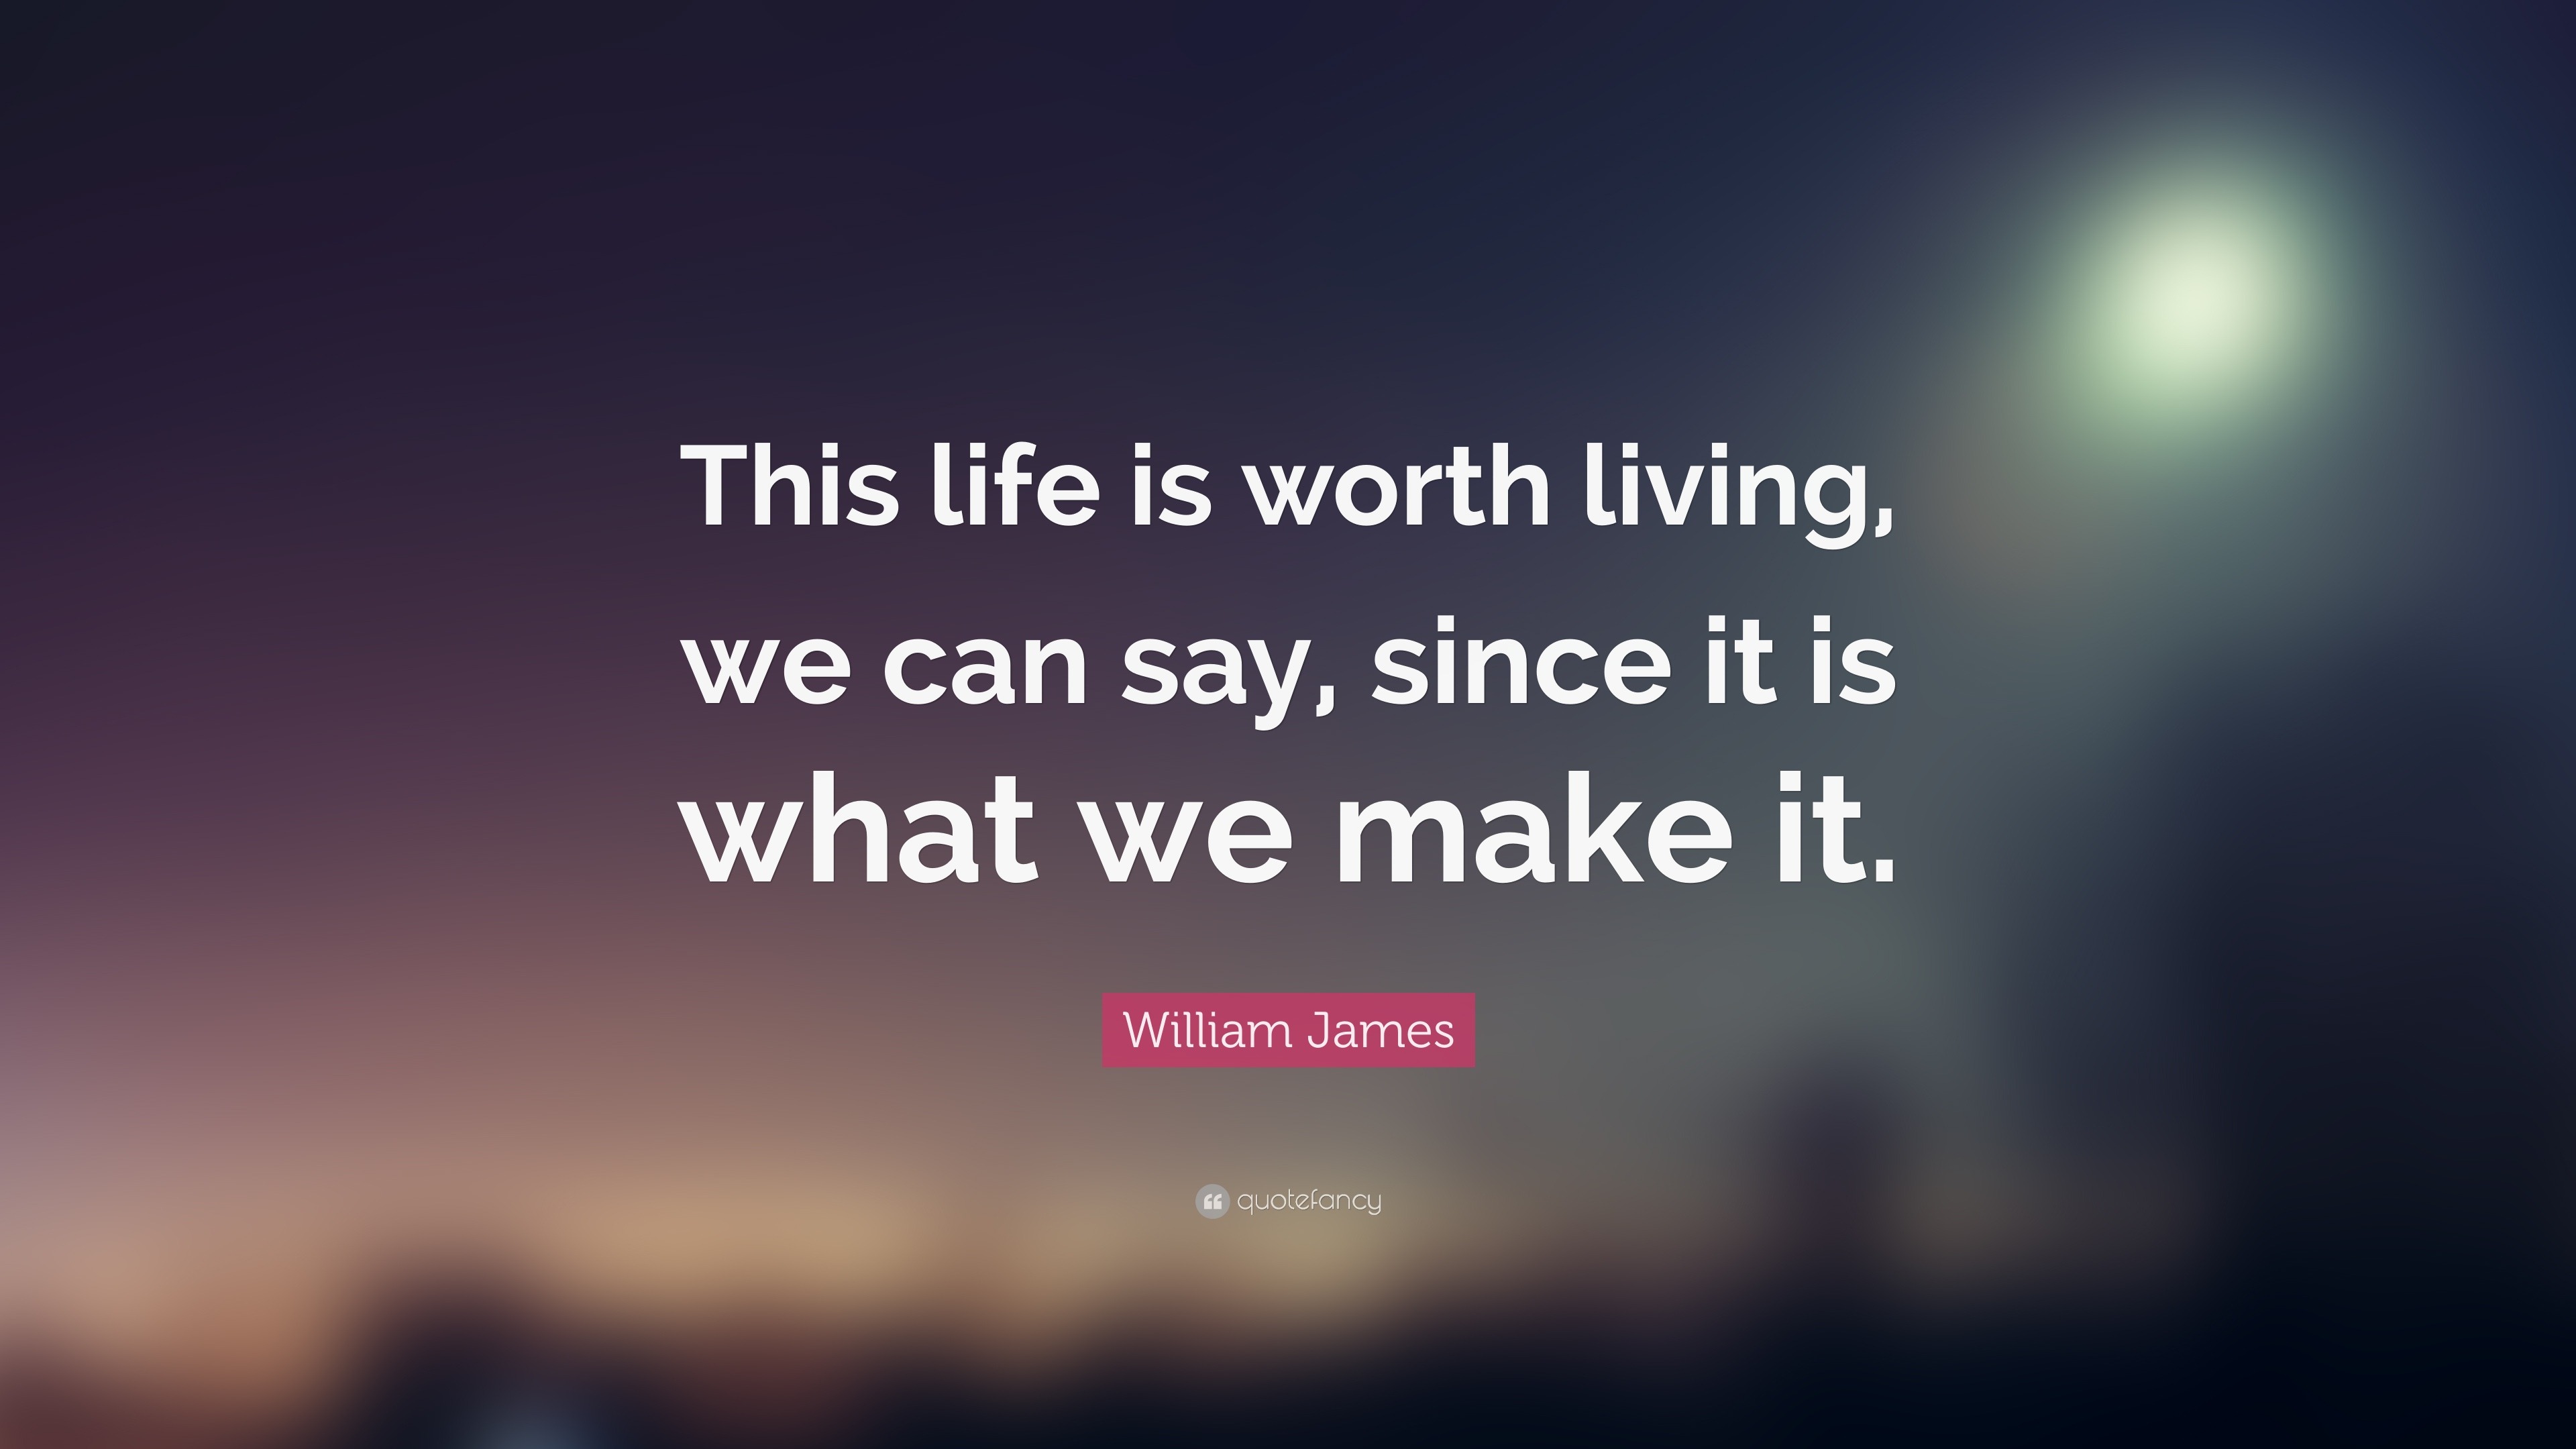 William James Quote “This life is worth living we can say since